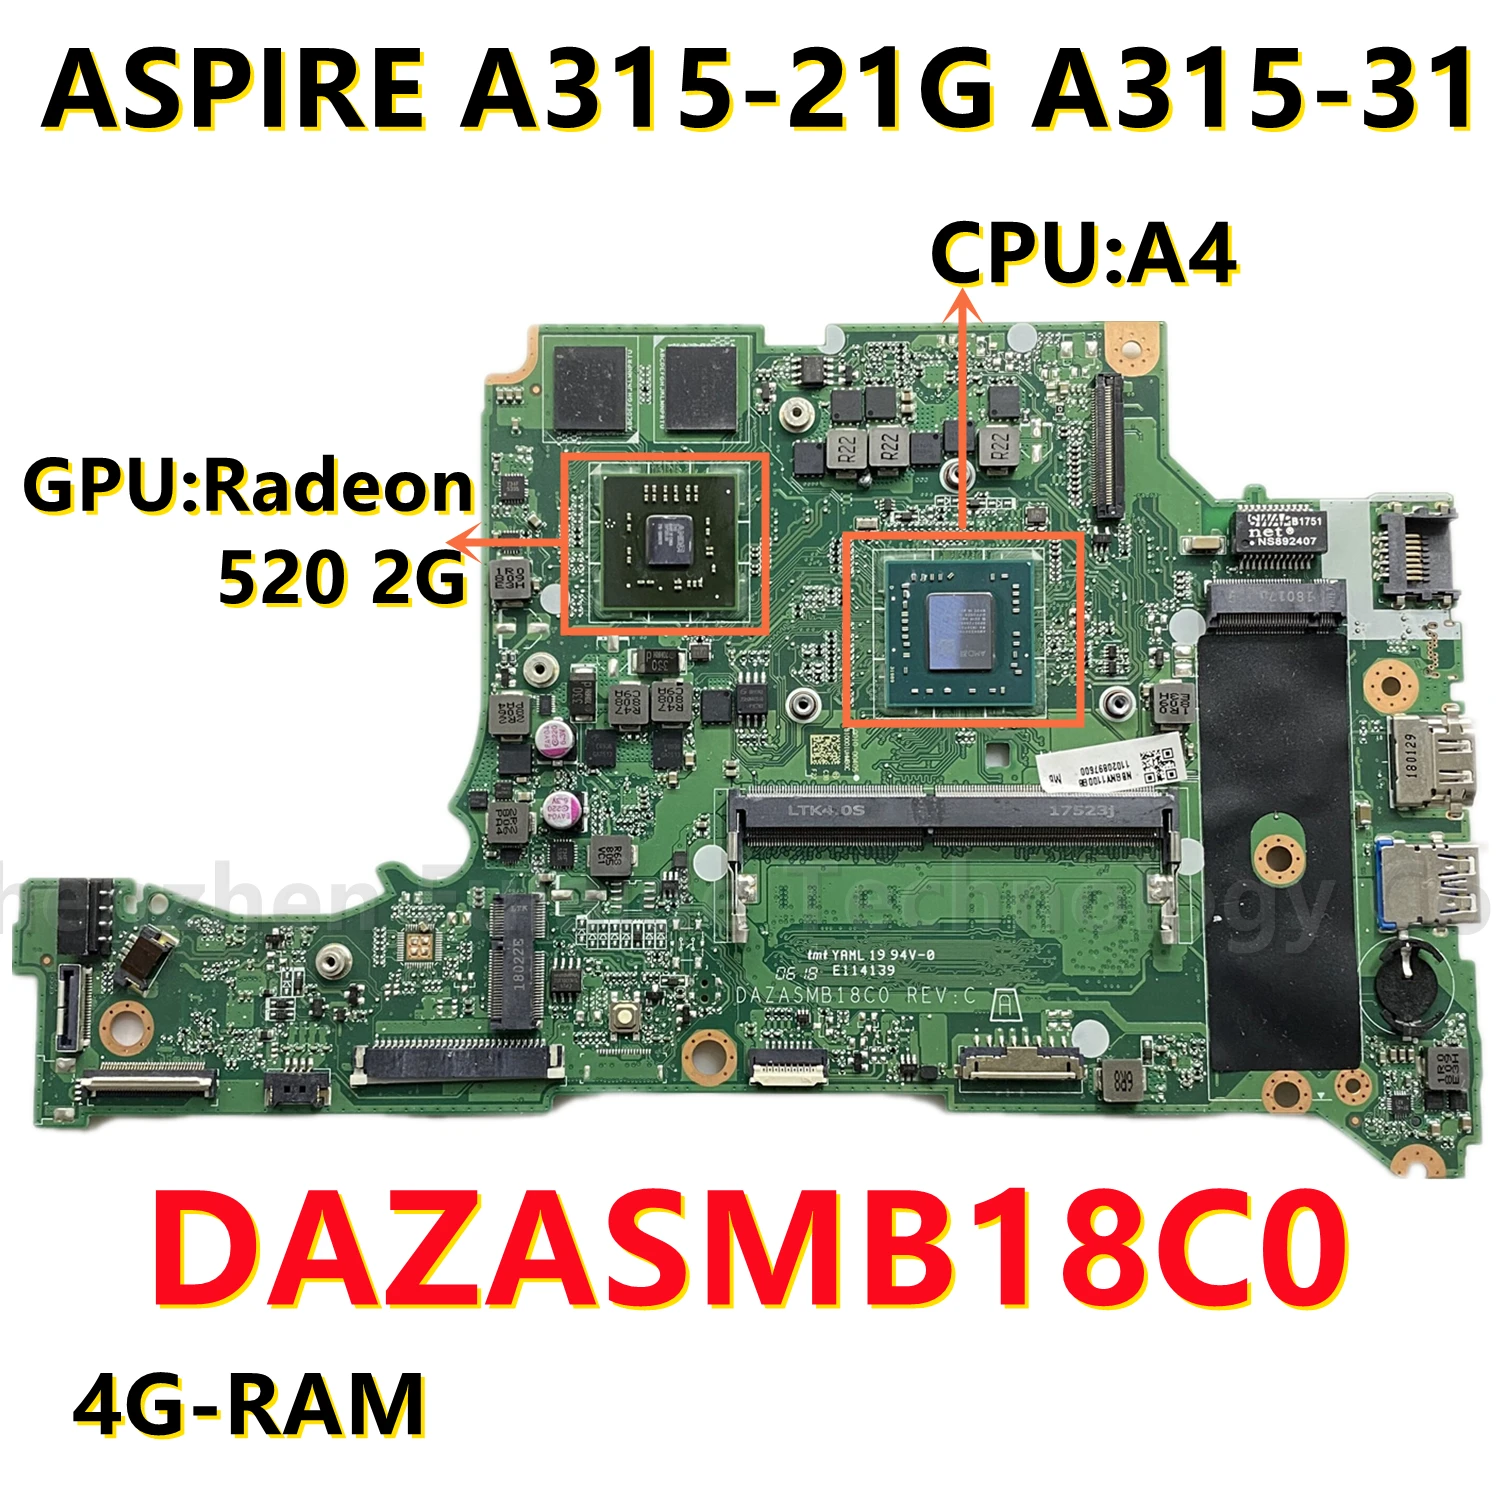 

DAZASMB18C0 For Acer ASPIRE A315-21G A315-31 Laptop Motherboard NBGNV1100G NB.GNV11.00G With A4 CPU 216-0890010 4GB-RAM Test OK